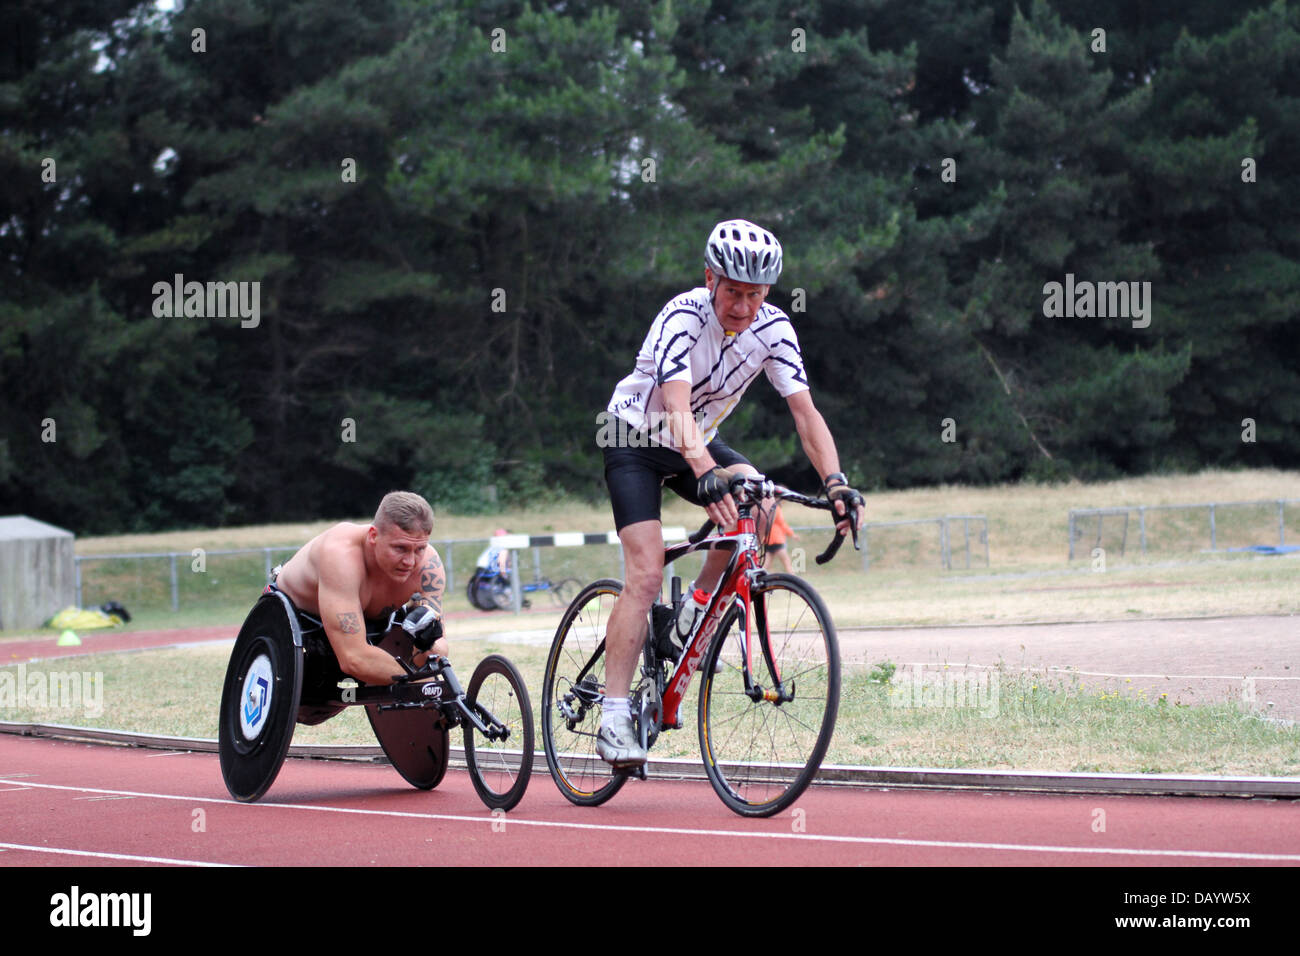 The Paralympian David Weir training at Kingsmeadow athletics track in Norbiton, South London with a cyclist as pacemaker. Stock Photo